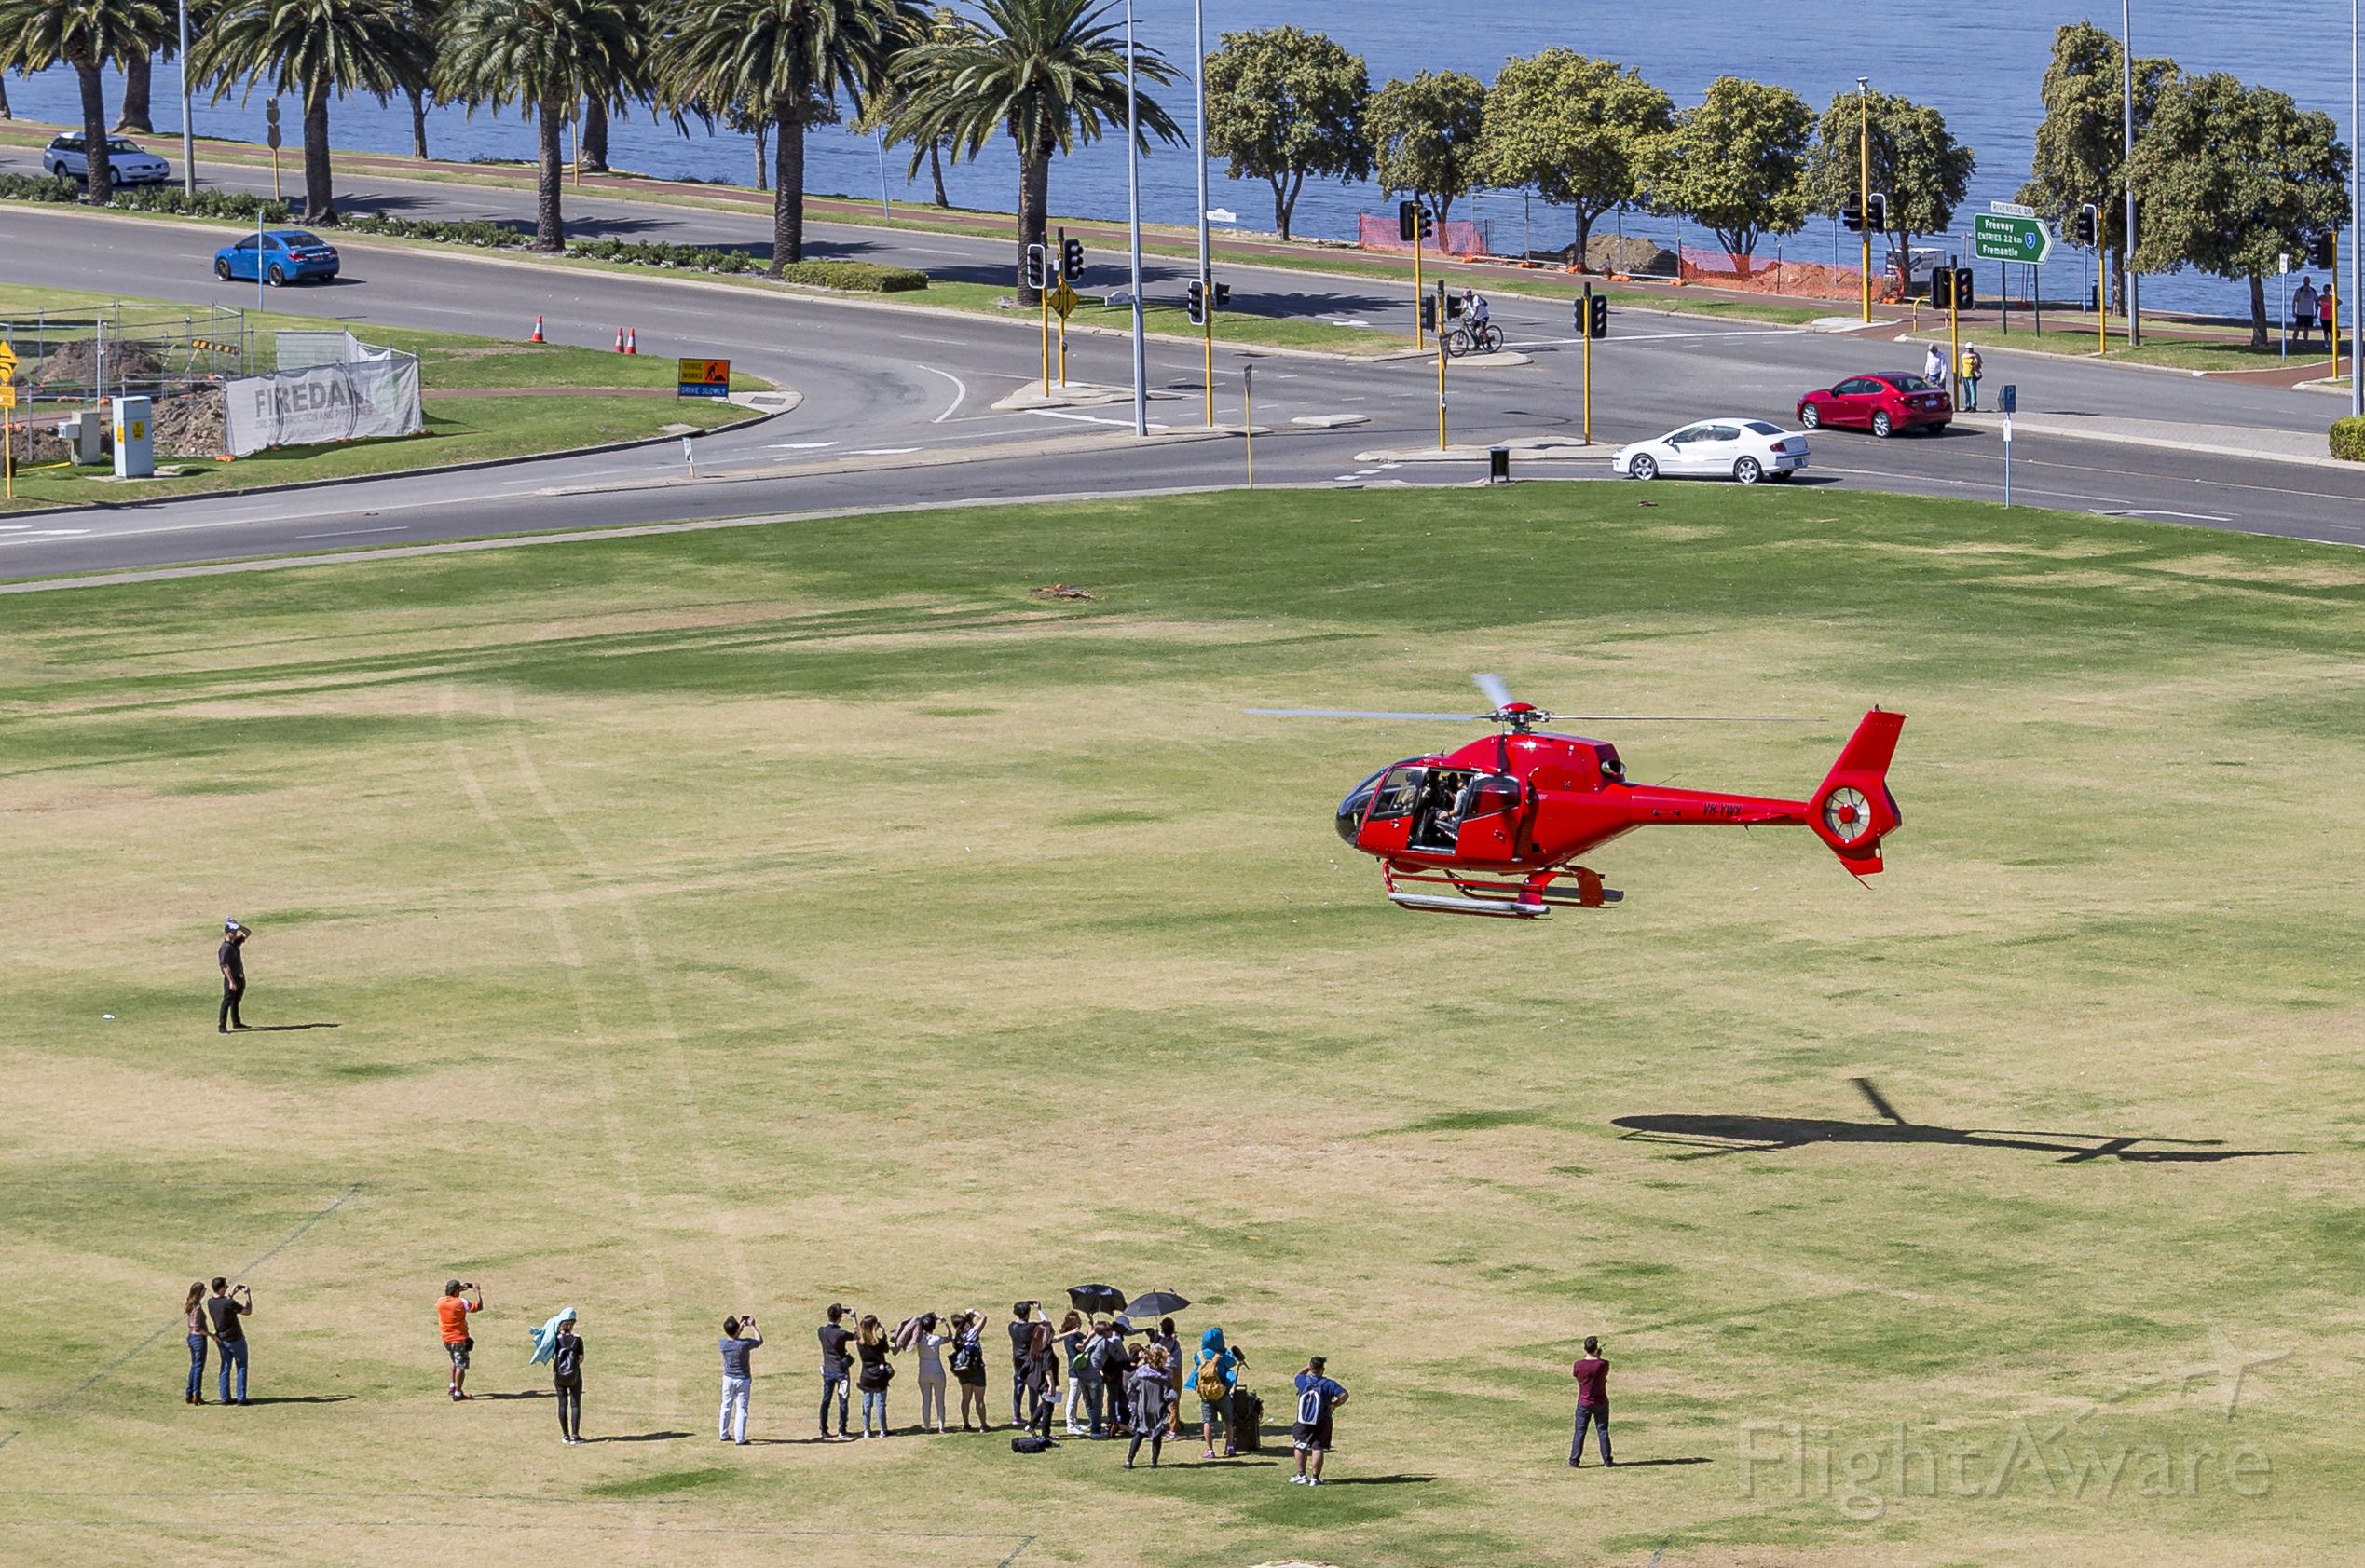 VH-YWY — - A West Coast Helicopters Eurocopter landing at Langley Park in Perth with the Swan River in the background. Ferrying tourists to Rottnest Island.